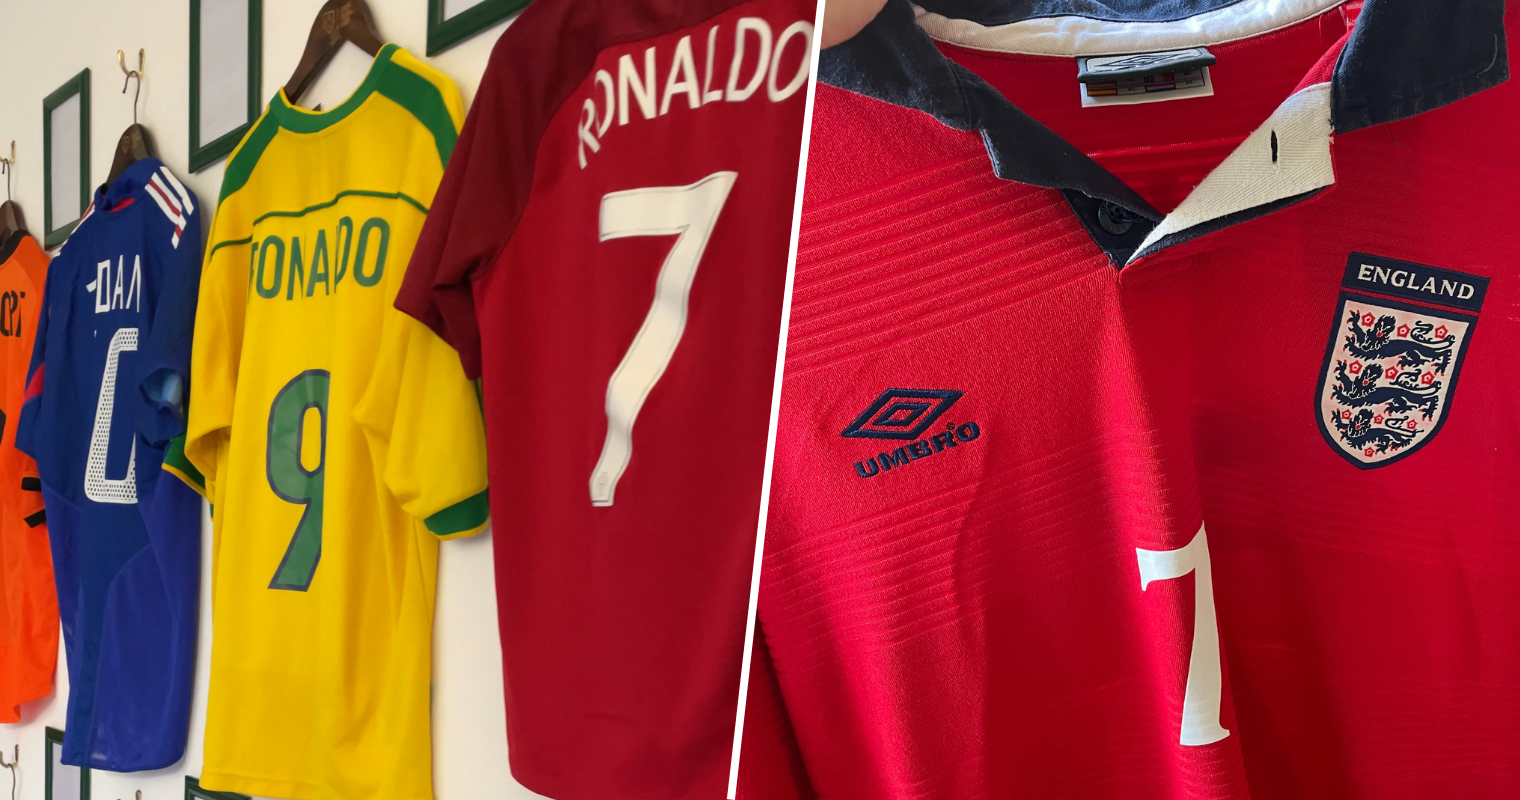 Umbro release retro nations kit collection